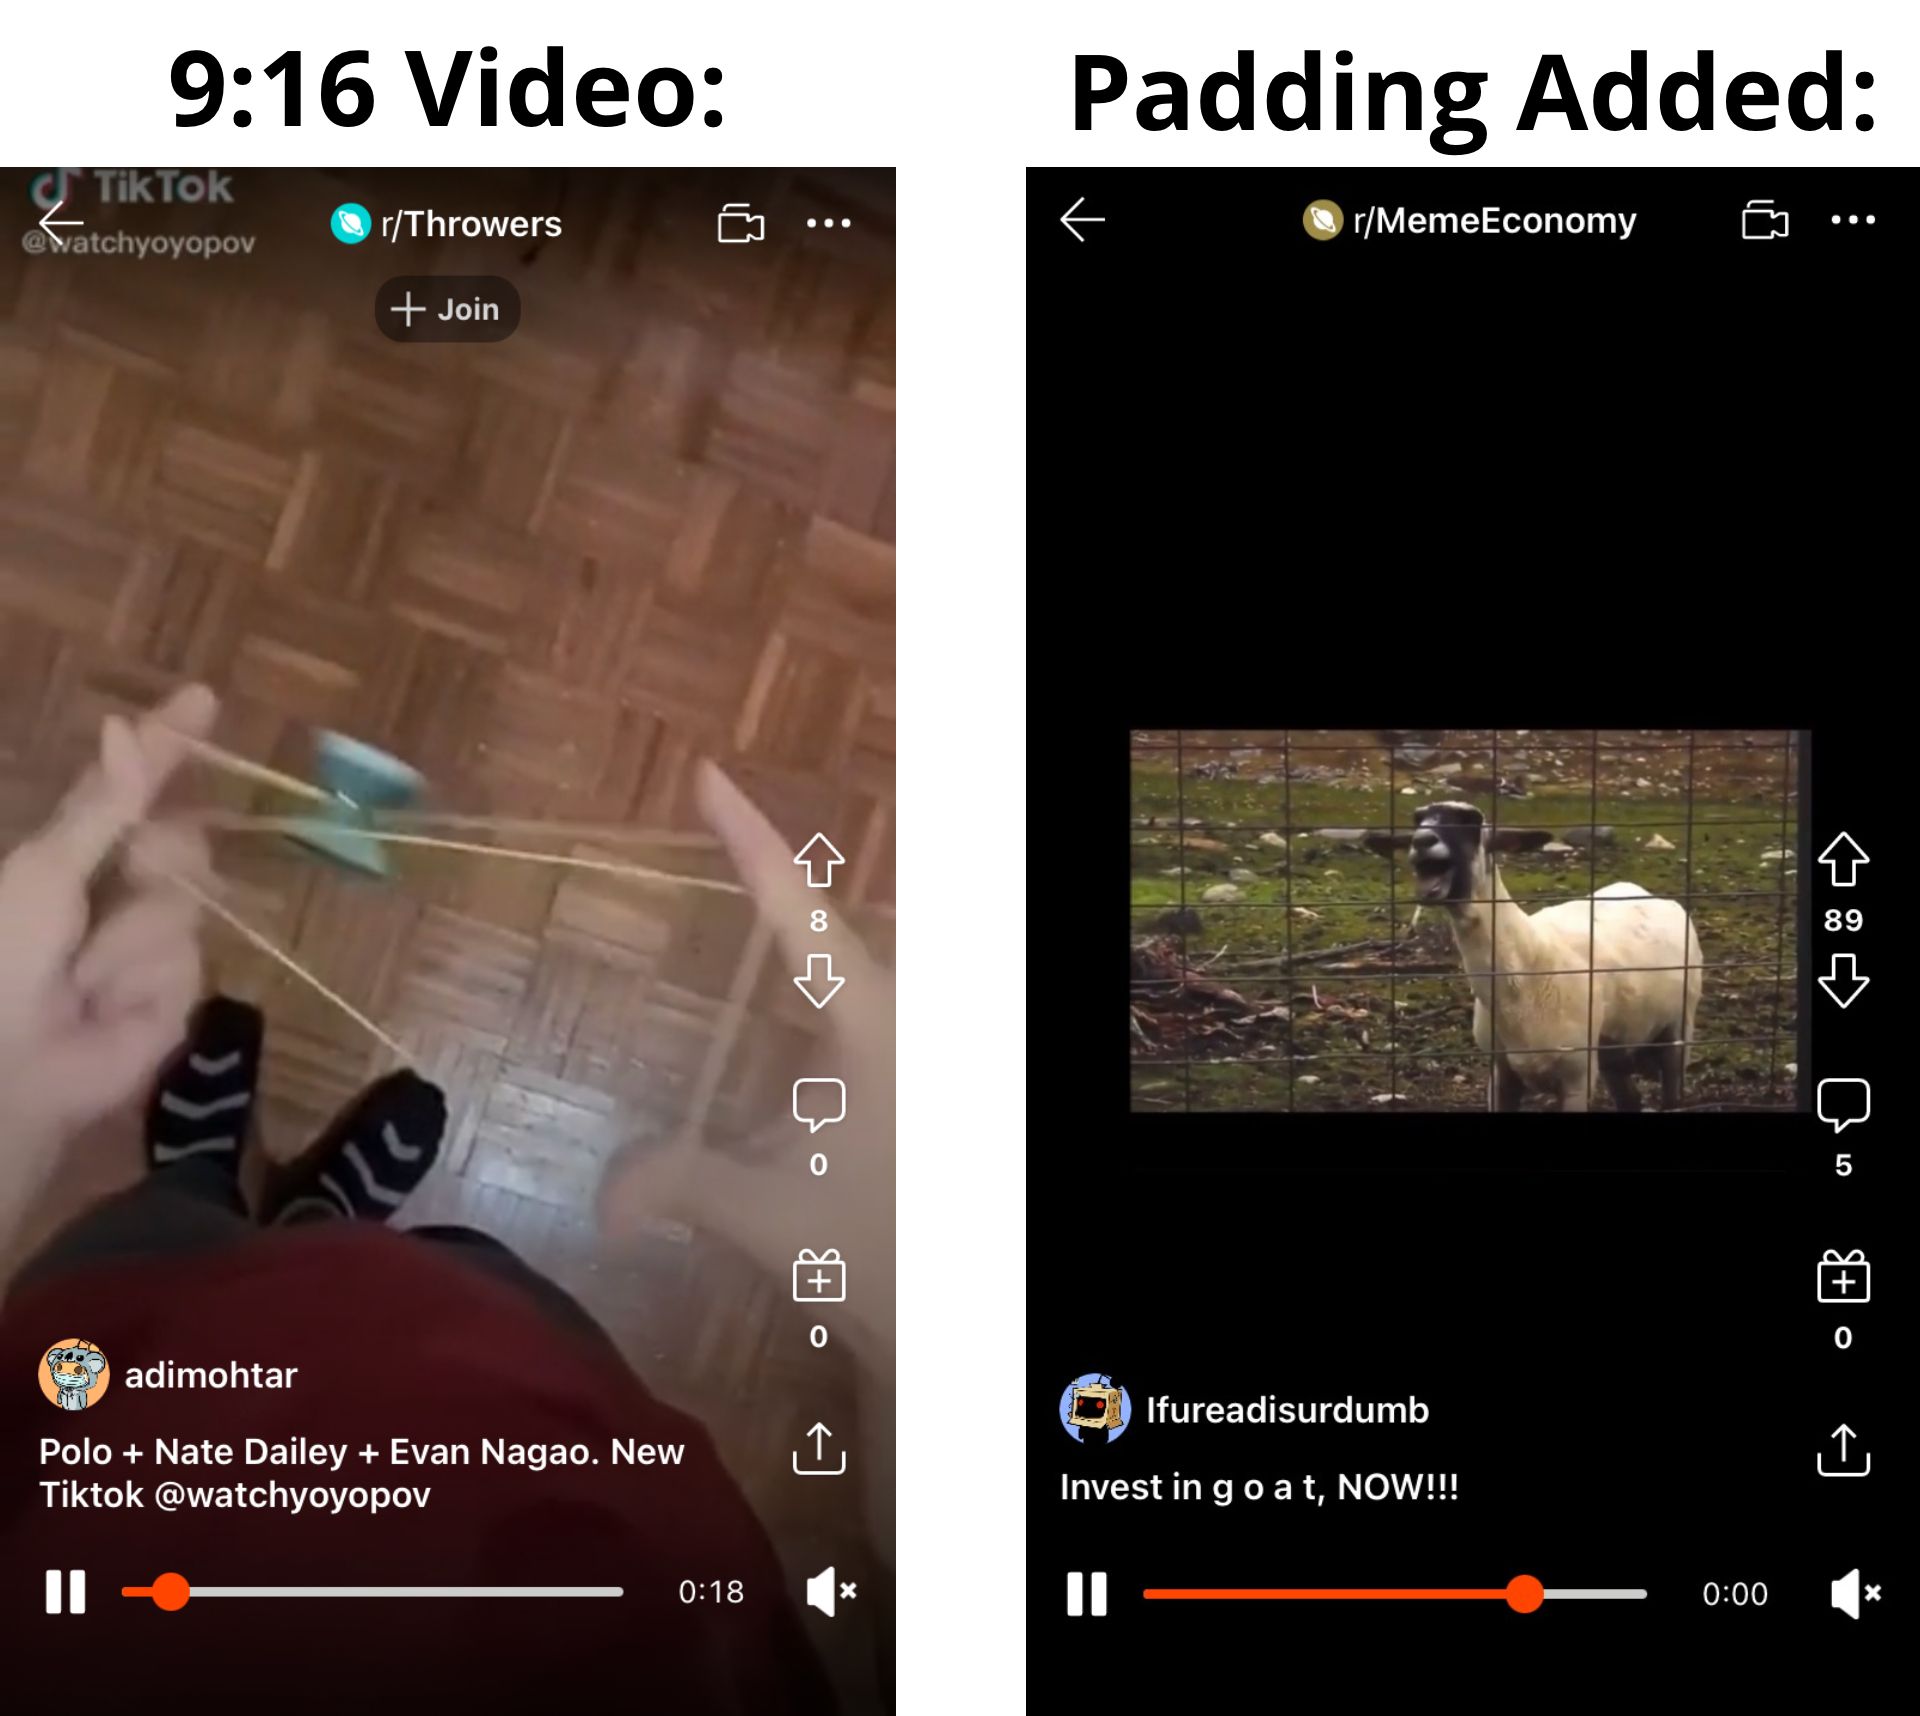 Screenshots showing Reddit videos shown in 9:16 full screen and with bars added to the top and bottom. 